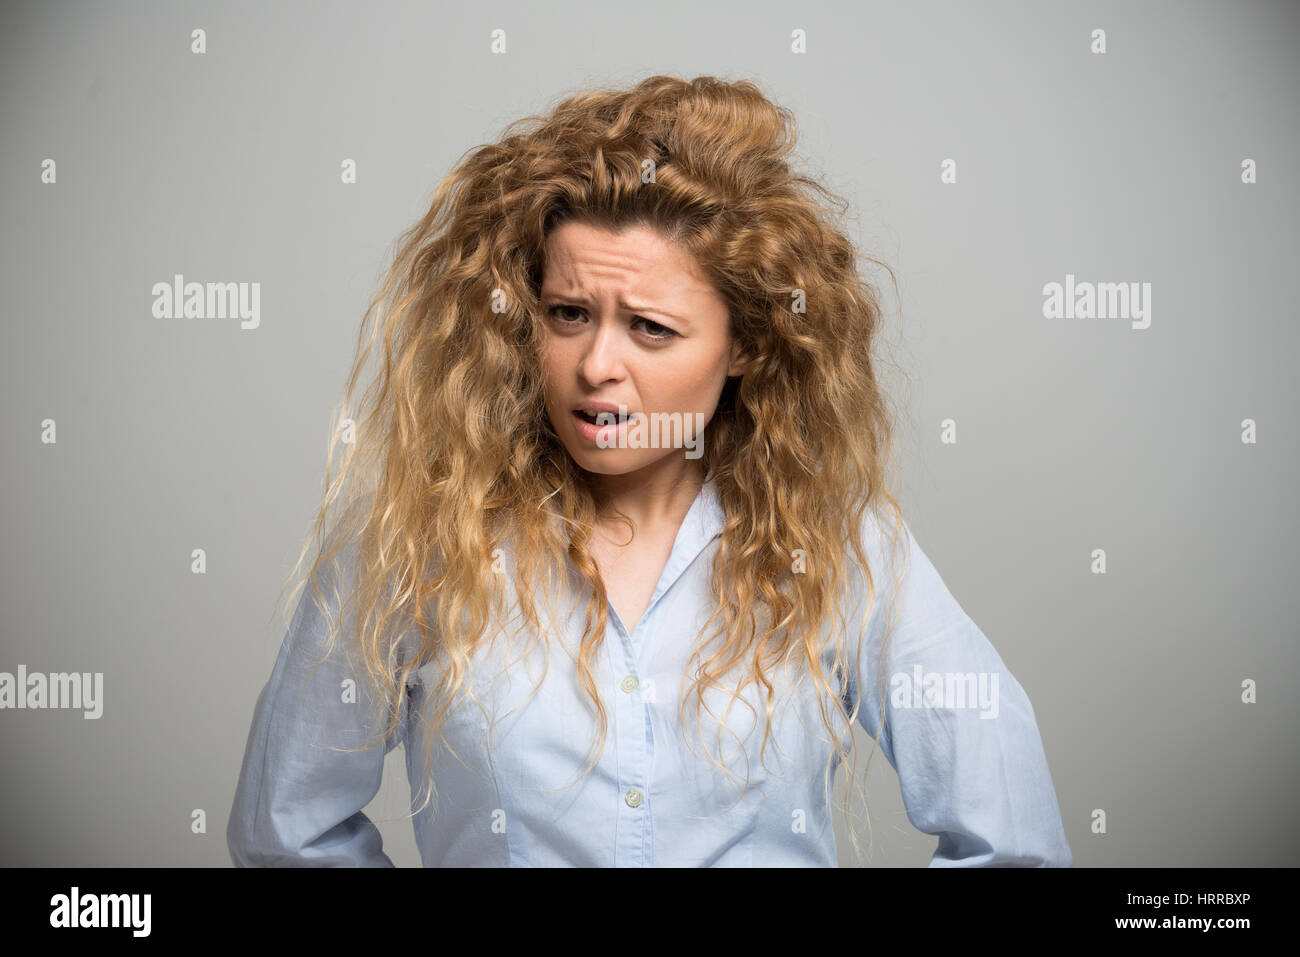 Portrait of an annoyed woman Stock Photo